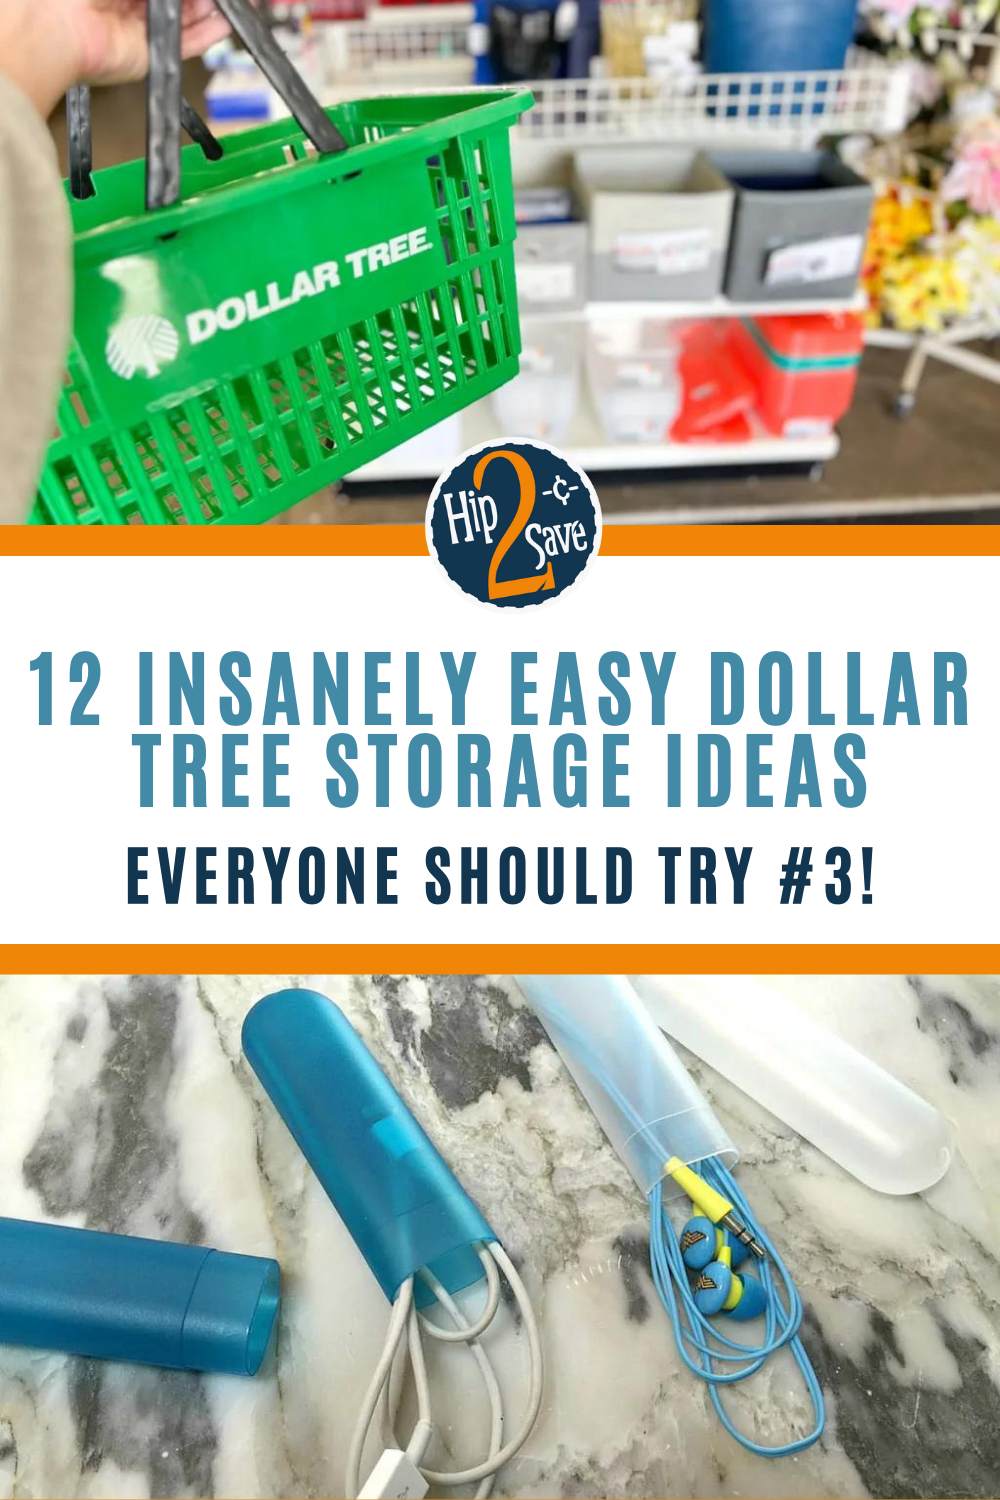 Make A Tote Bag Using just TWO DOLLAR TREE PLACEMATS! dollar tree hack  🌟GENIUS🌟 | Dollar tree hacks, Dollar tree, Dollar store diy projects